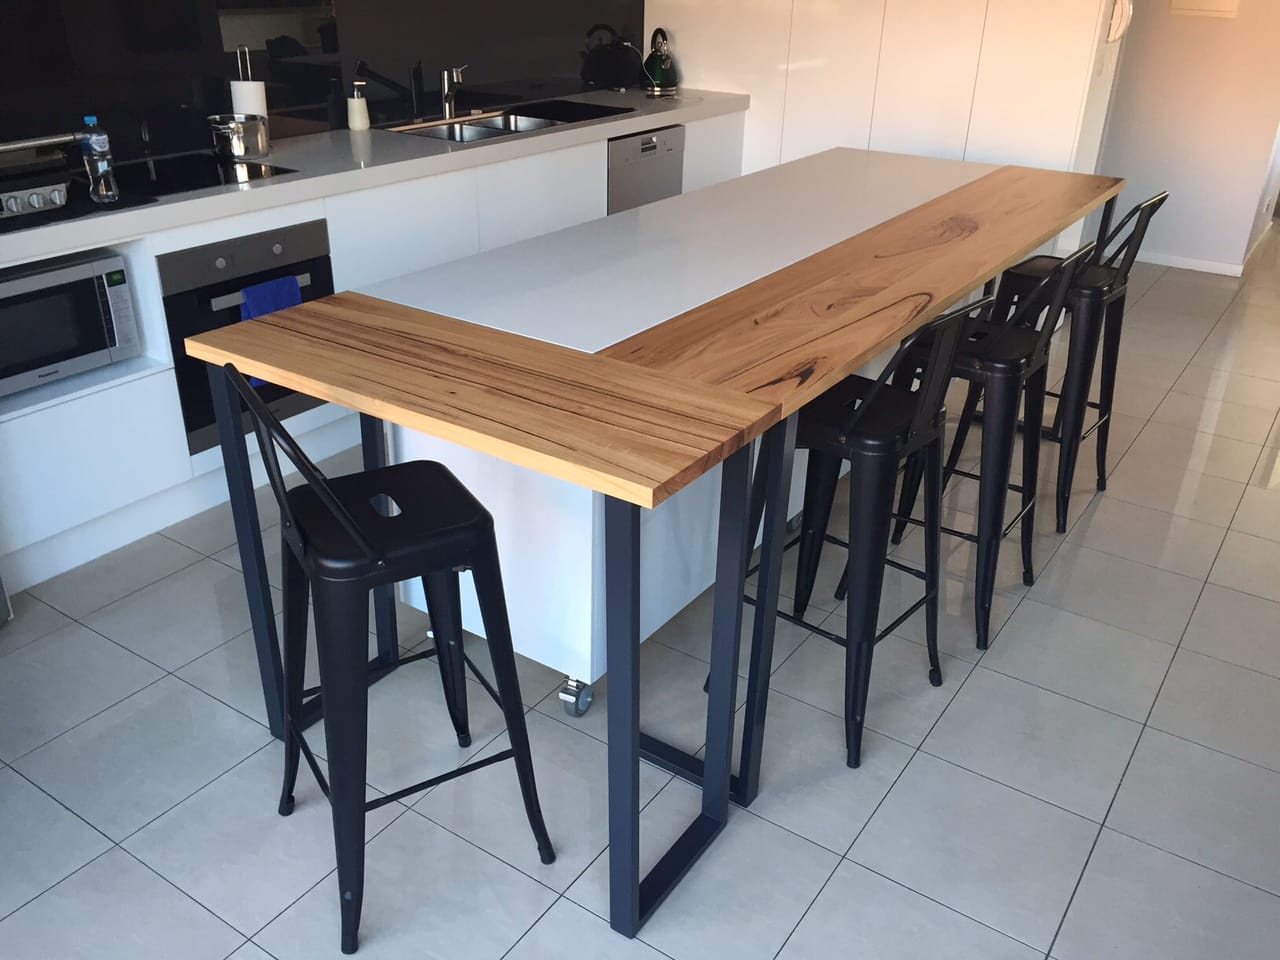 extra high kitchen table